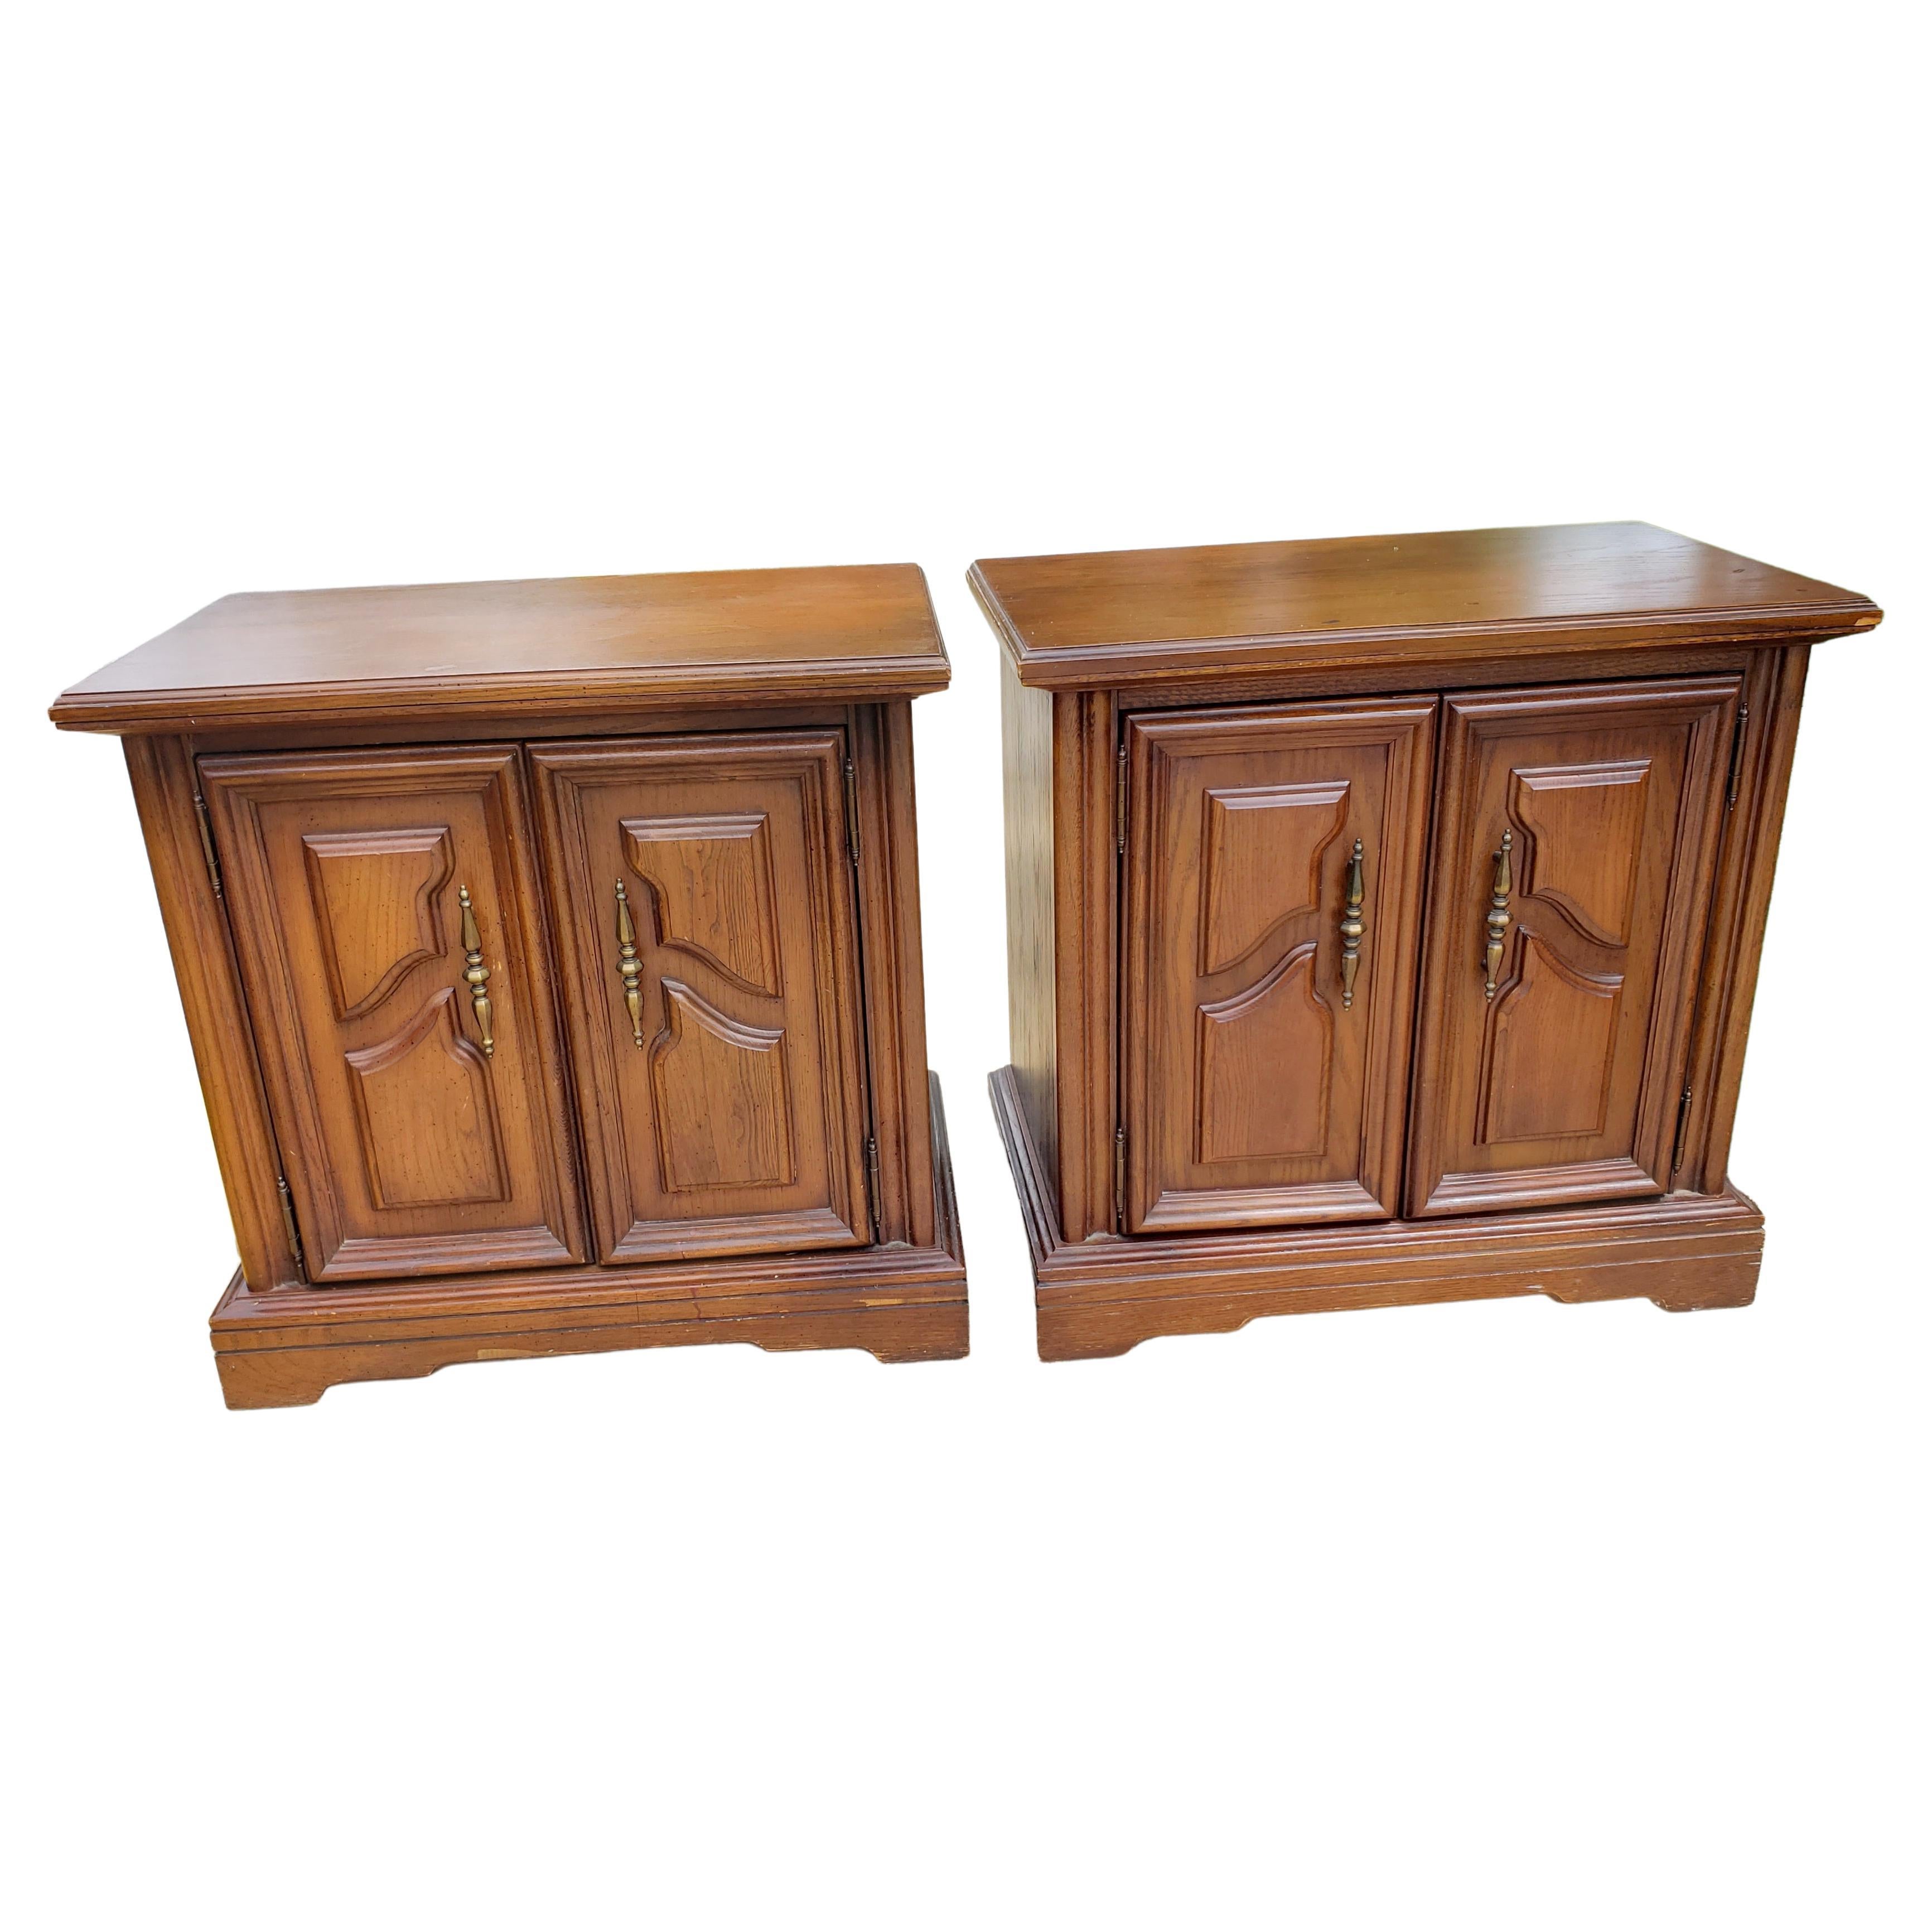 Pair of Renaissance style walnut side tables / nightstands.
Panelized French doors open to reveal a top dovetailed drawer and bottom large storage area.
Very good vintage condition.

W1060222E.